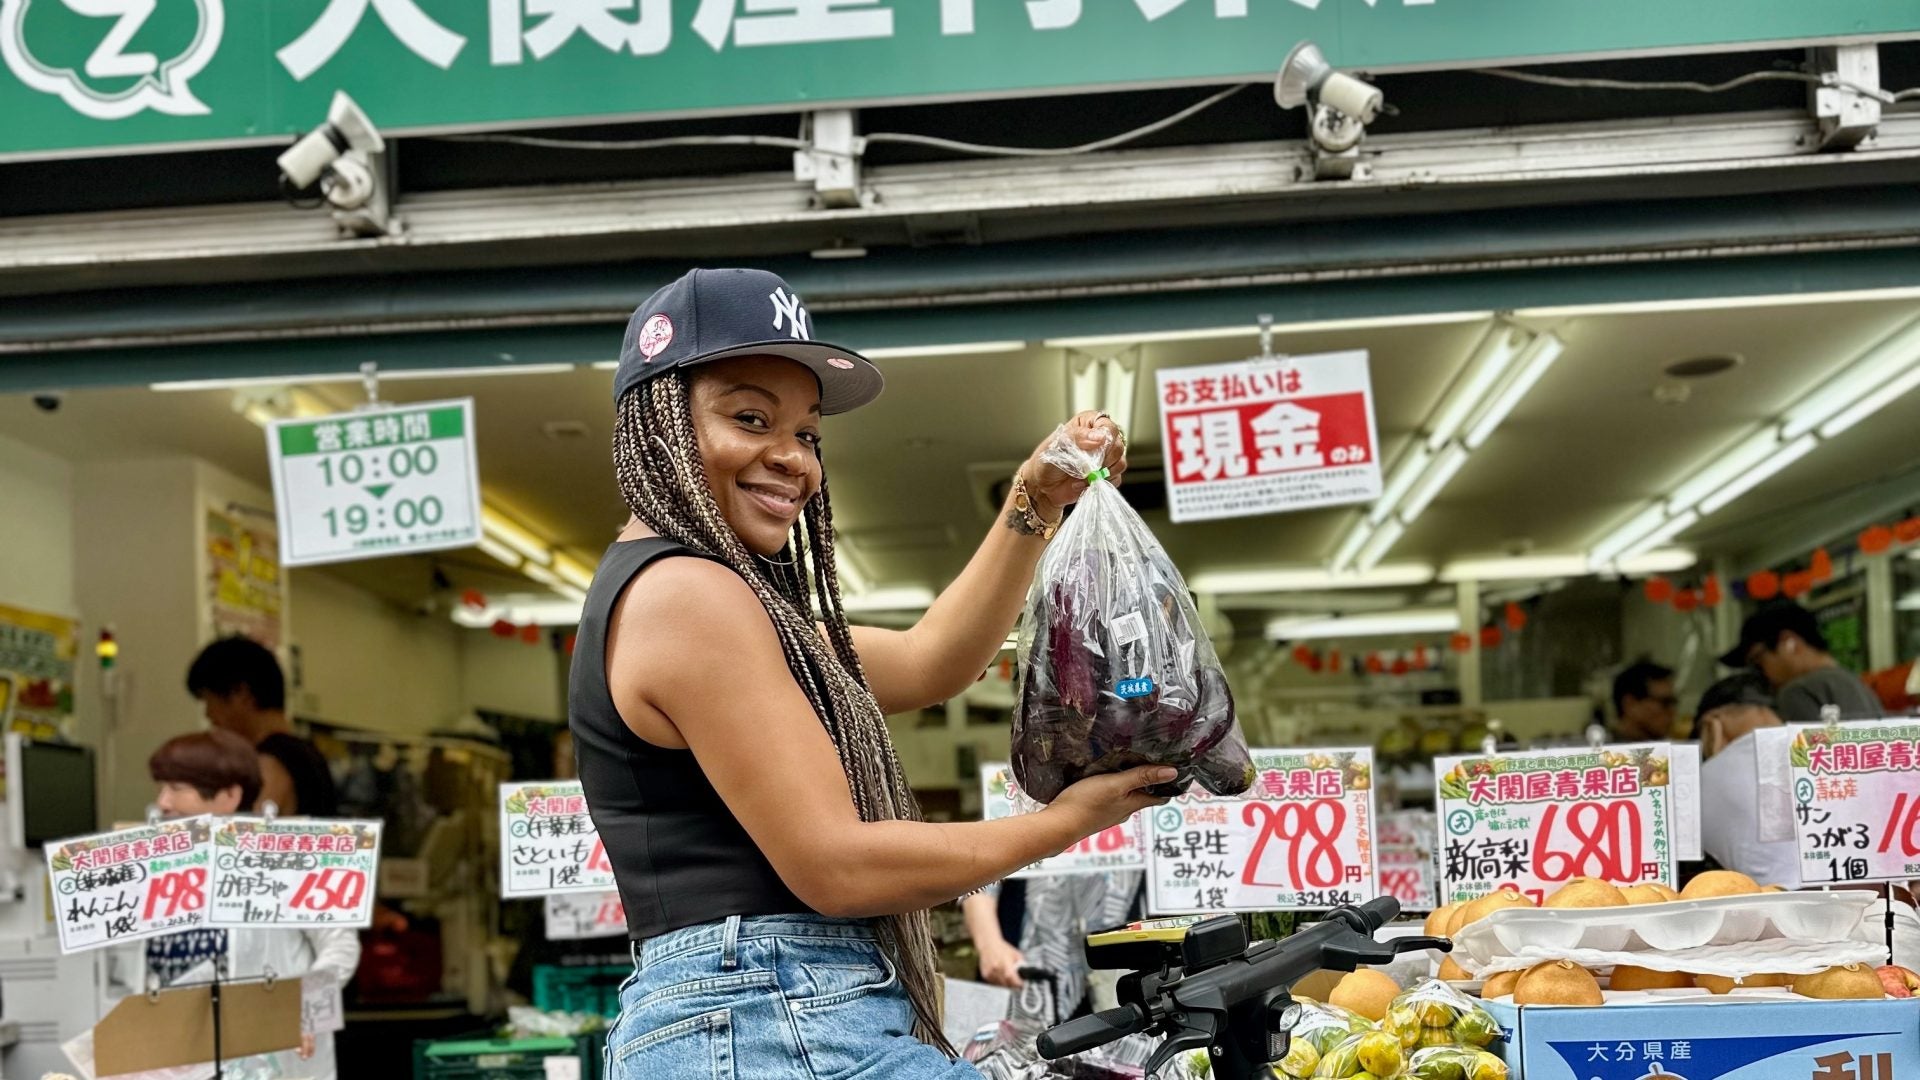 The Black Girl's Guide To Getting Lost And Getting Grillz In Tokyo